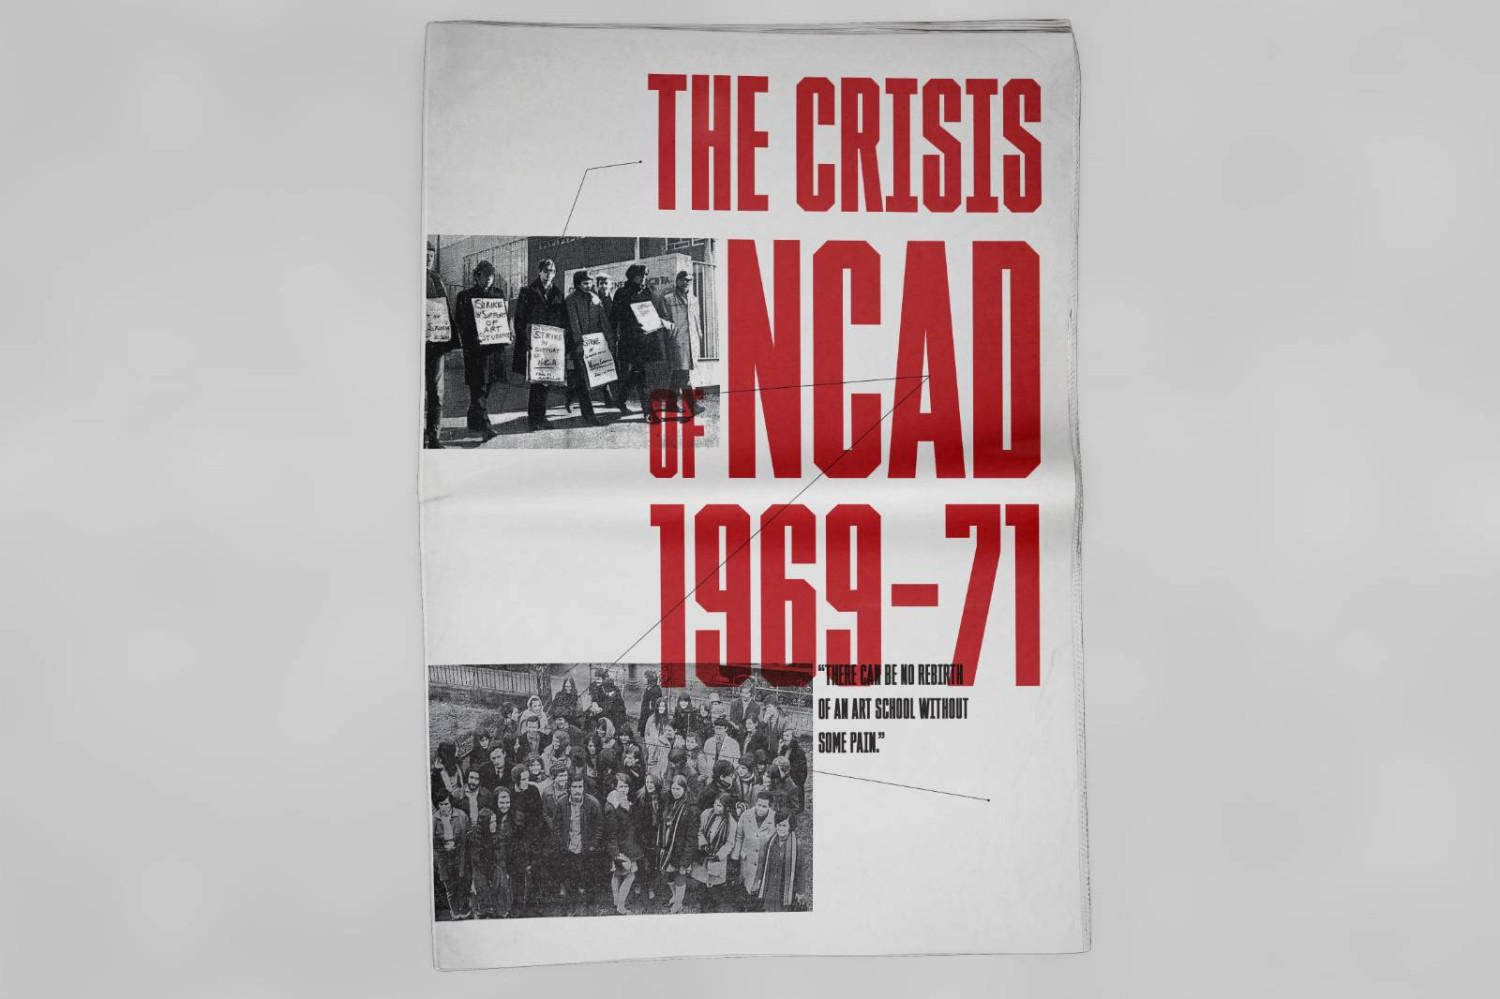 *The crisis of NCAD 1969-71*, publication, cover